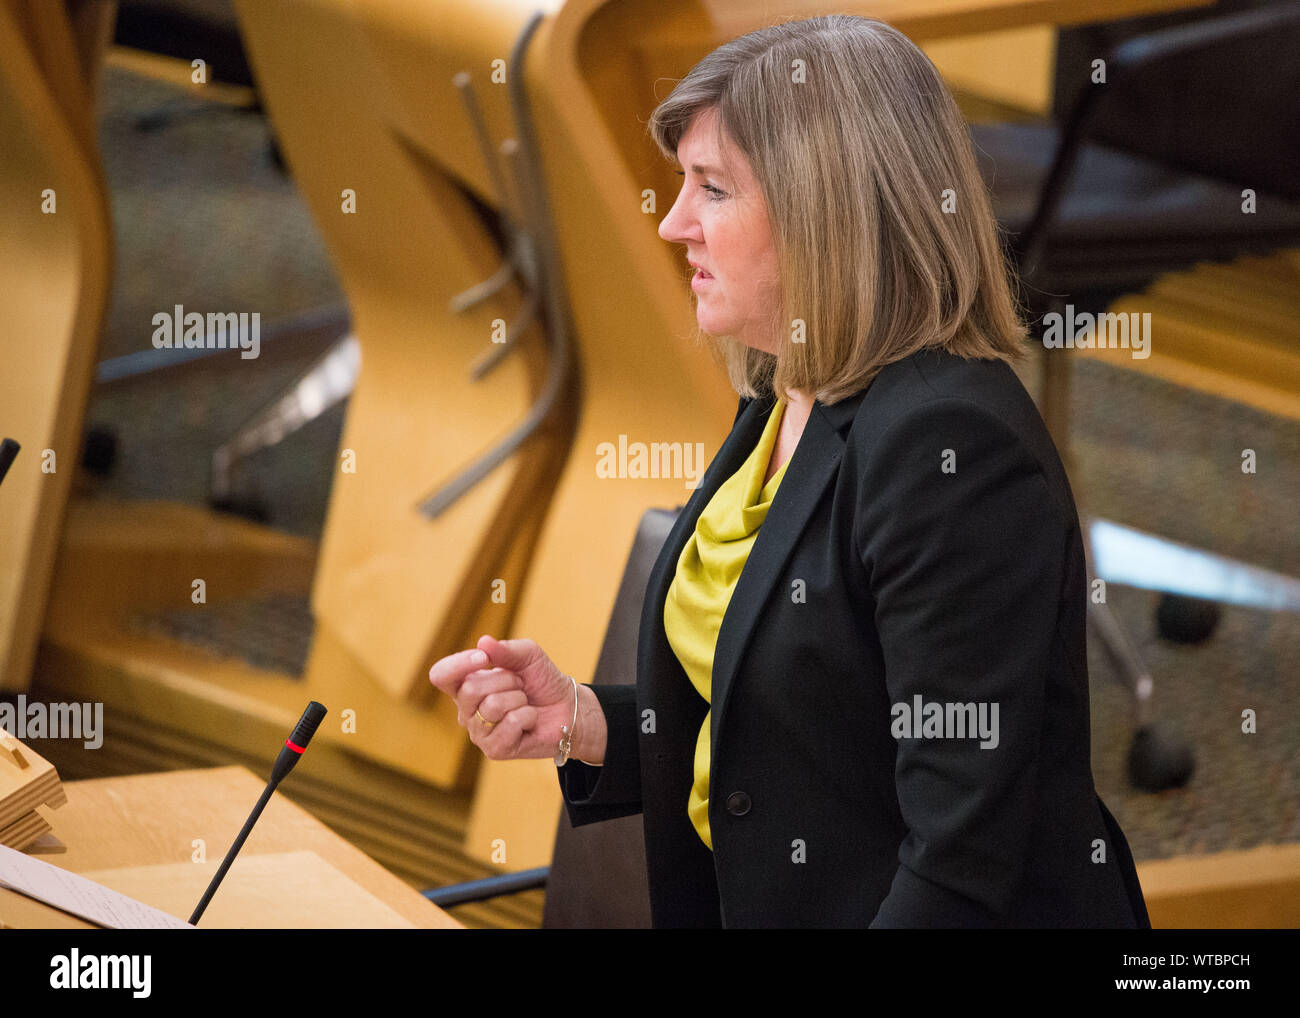 Edinburgh, UK. 5 September 2019. Pictured: Alison Johnstone MSP - Co-Leader of the Scottish Green Party. Health & Sport, Social Security, Children & Young People. Scottish Government Debate: Avoiding A No Deal Exit From The EU.  That the Parliament agrees that the UK should in no circumstances leave the EU on a no-deal basis, and condemns the Prime Minister’s suspension of the UK Parliament from as early as 9 September until 14 October 2019. The result of the division is: For 87, Against 28, Abstentions 0. Colin Fisher/CDFIMAGES.COM Stock Photo